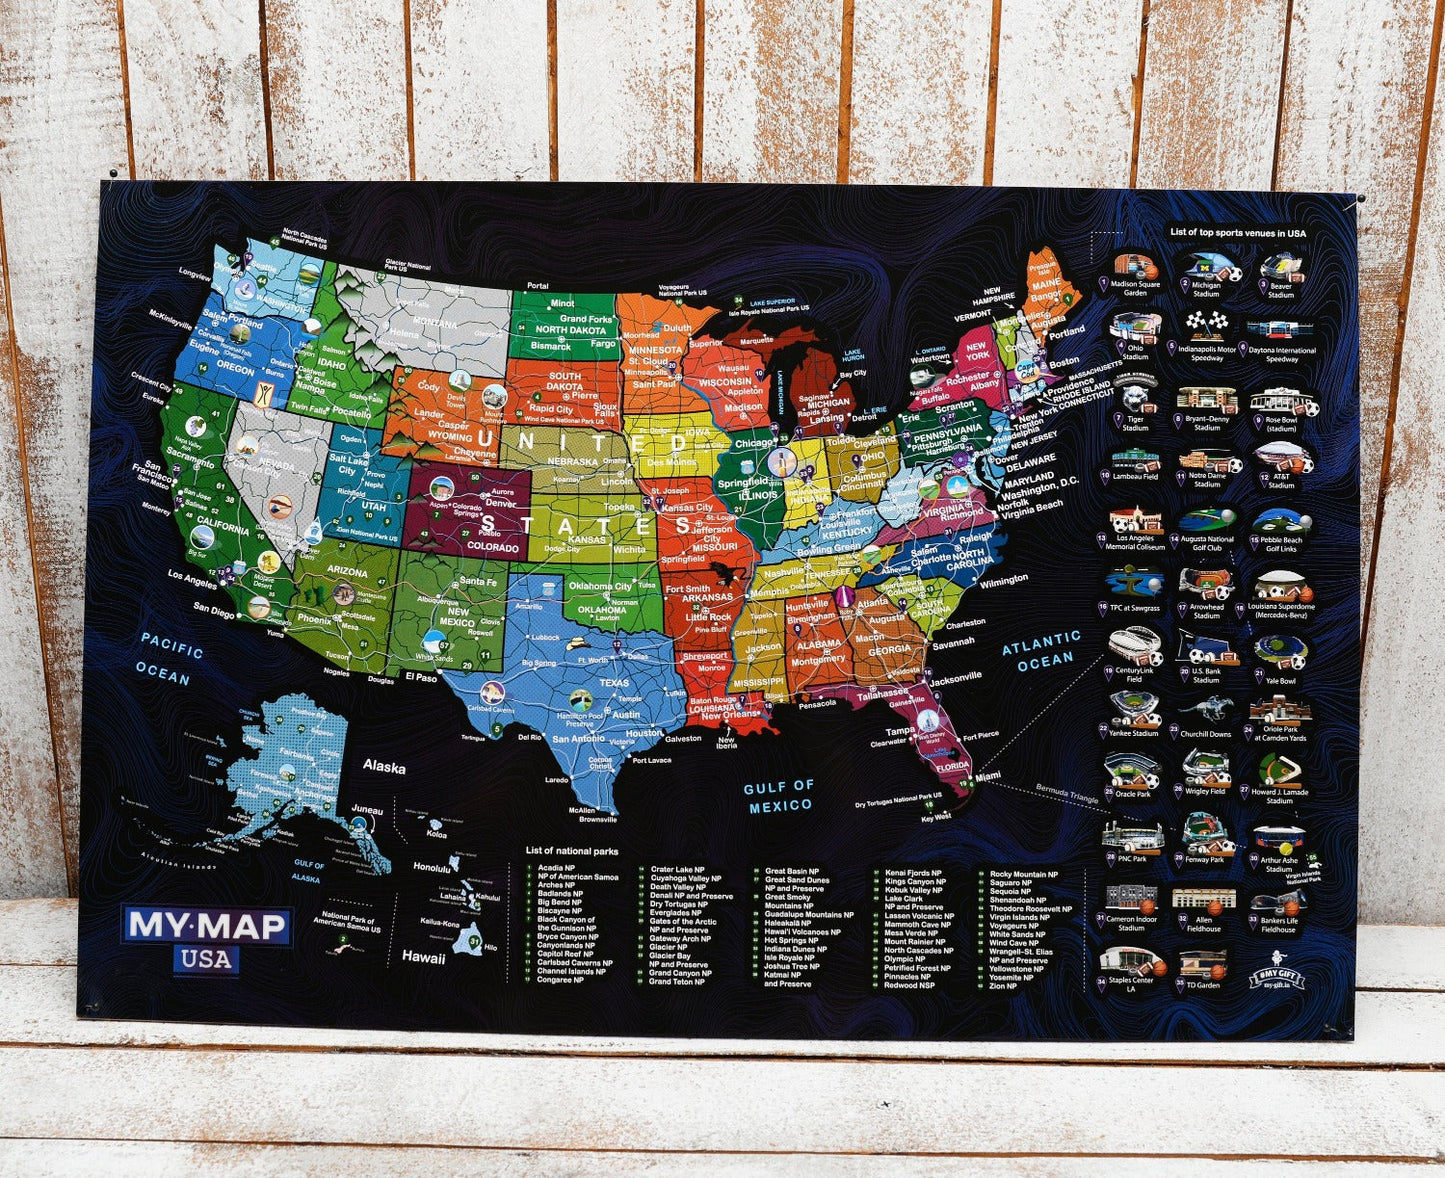 USA Scratch off world maps and posters, Travel Map gold map travel map canada map usa us map  map for travelers  large map scratch map scratch off mymap map antique map map black and gold map black and silver deluxe map  amazon world  map 